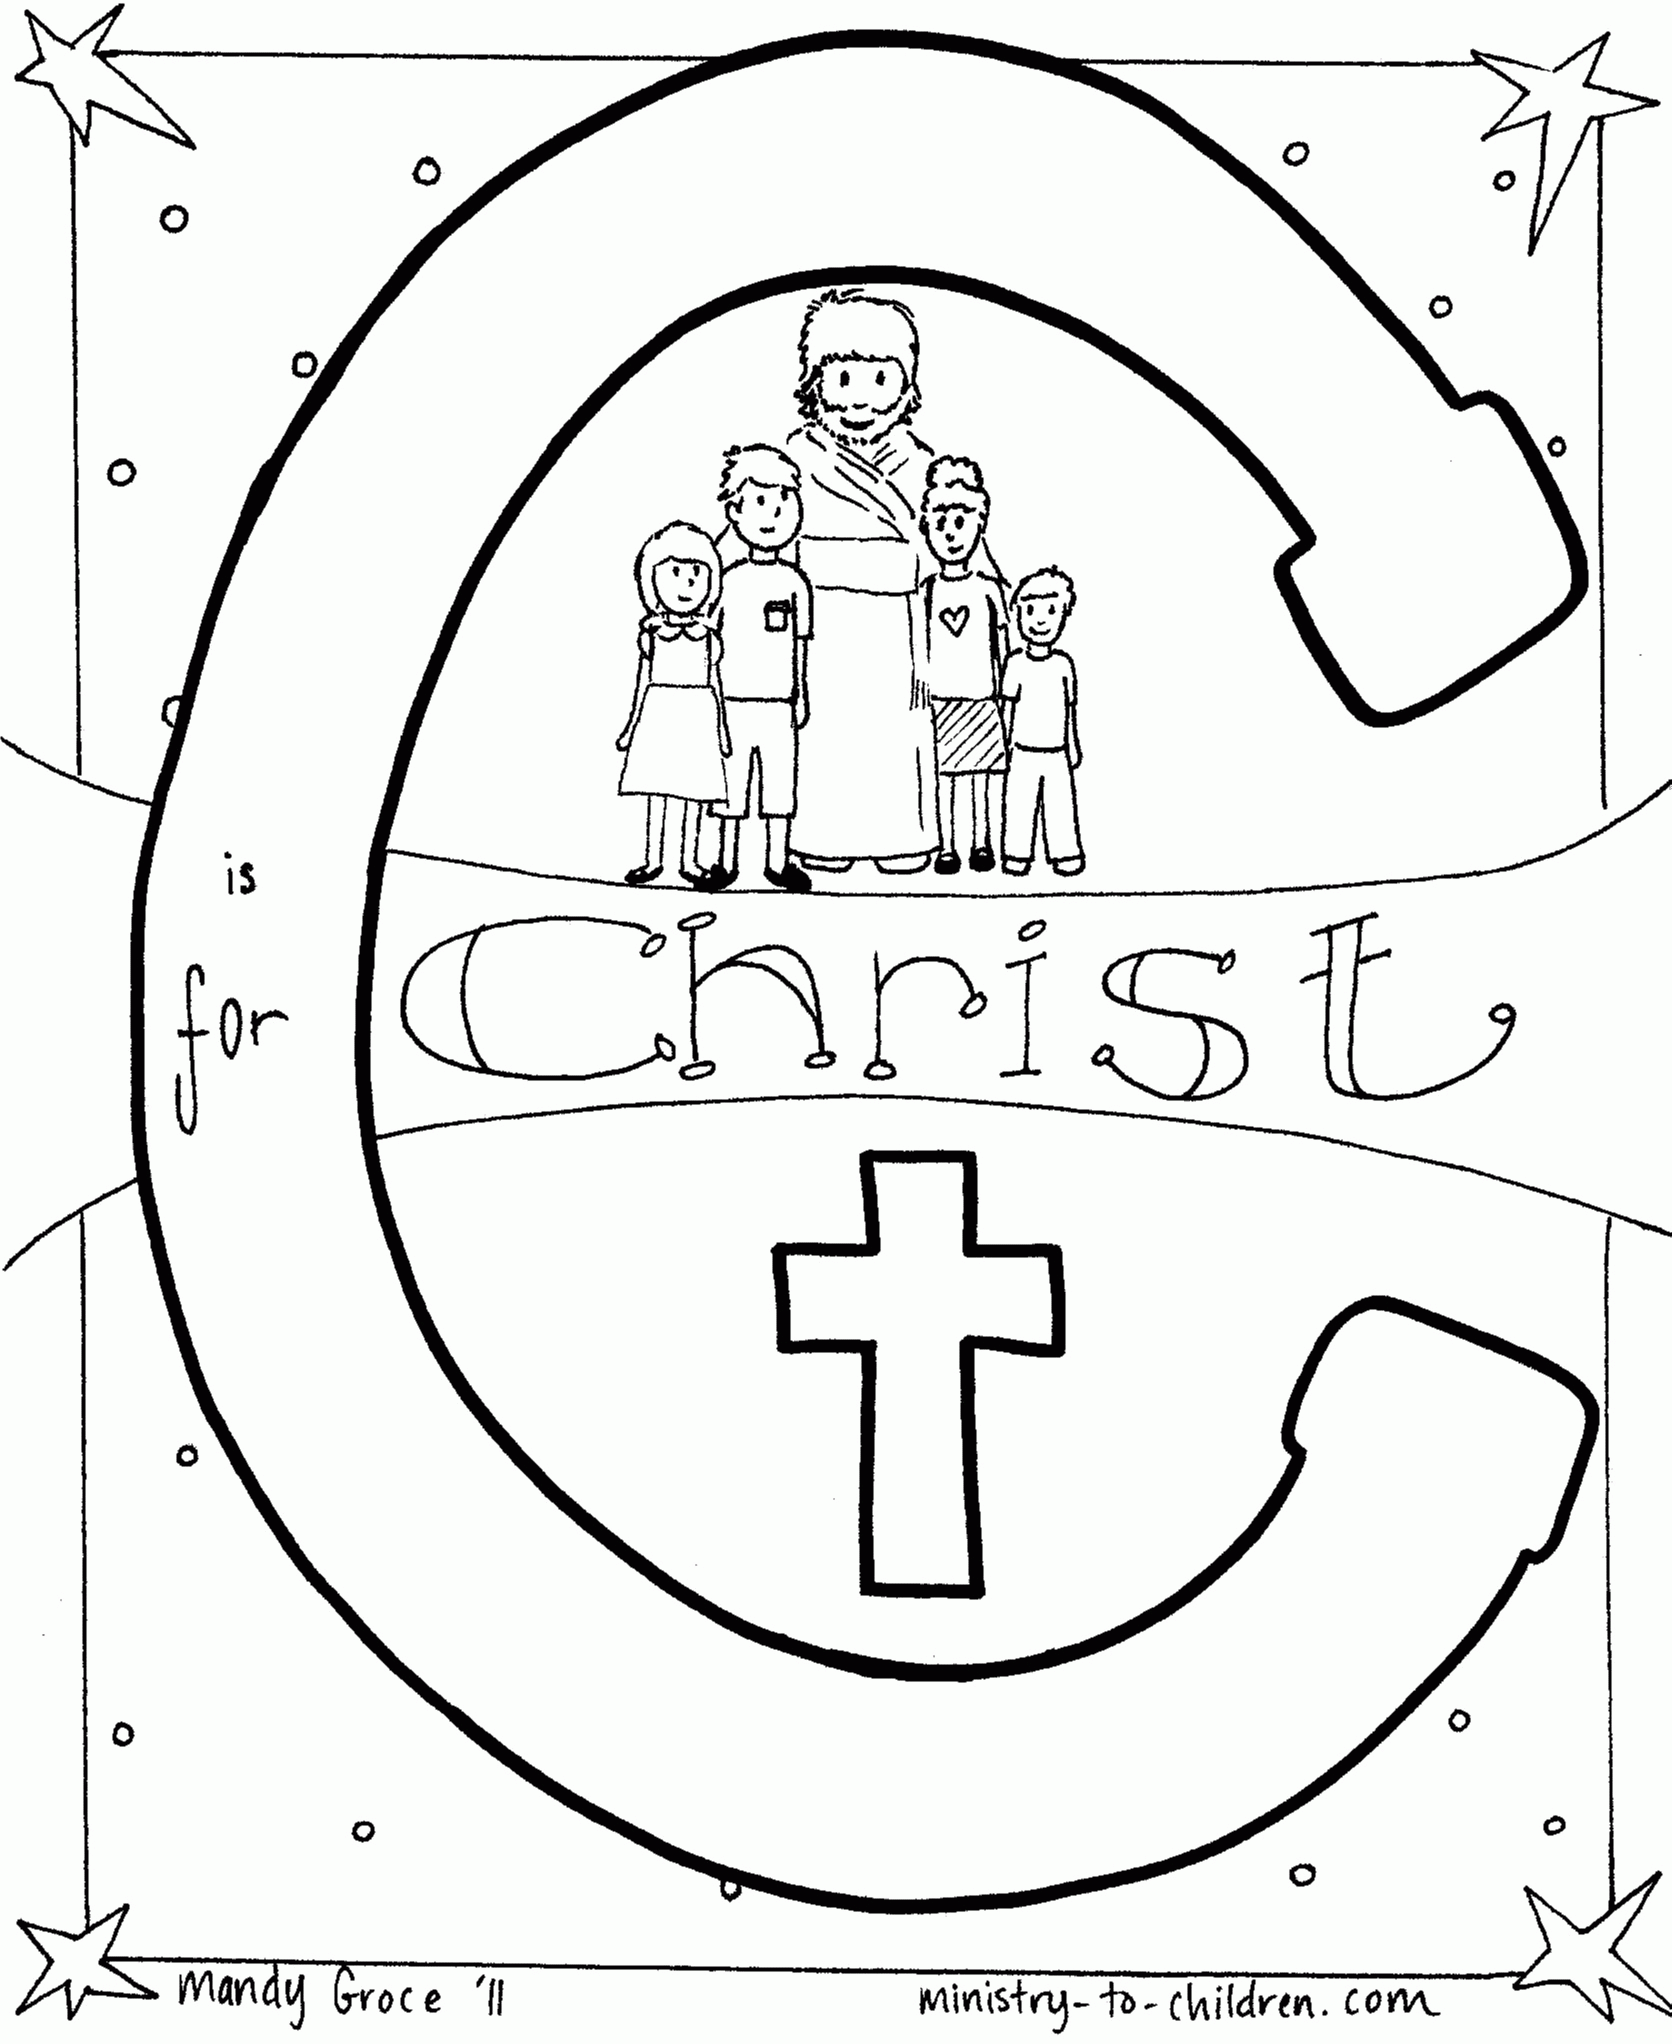 C is for Christ" Coloring Page